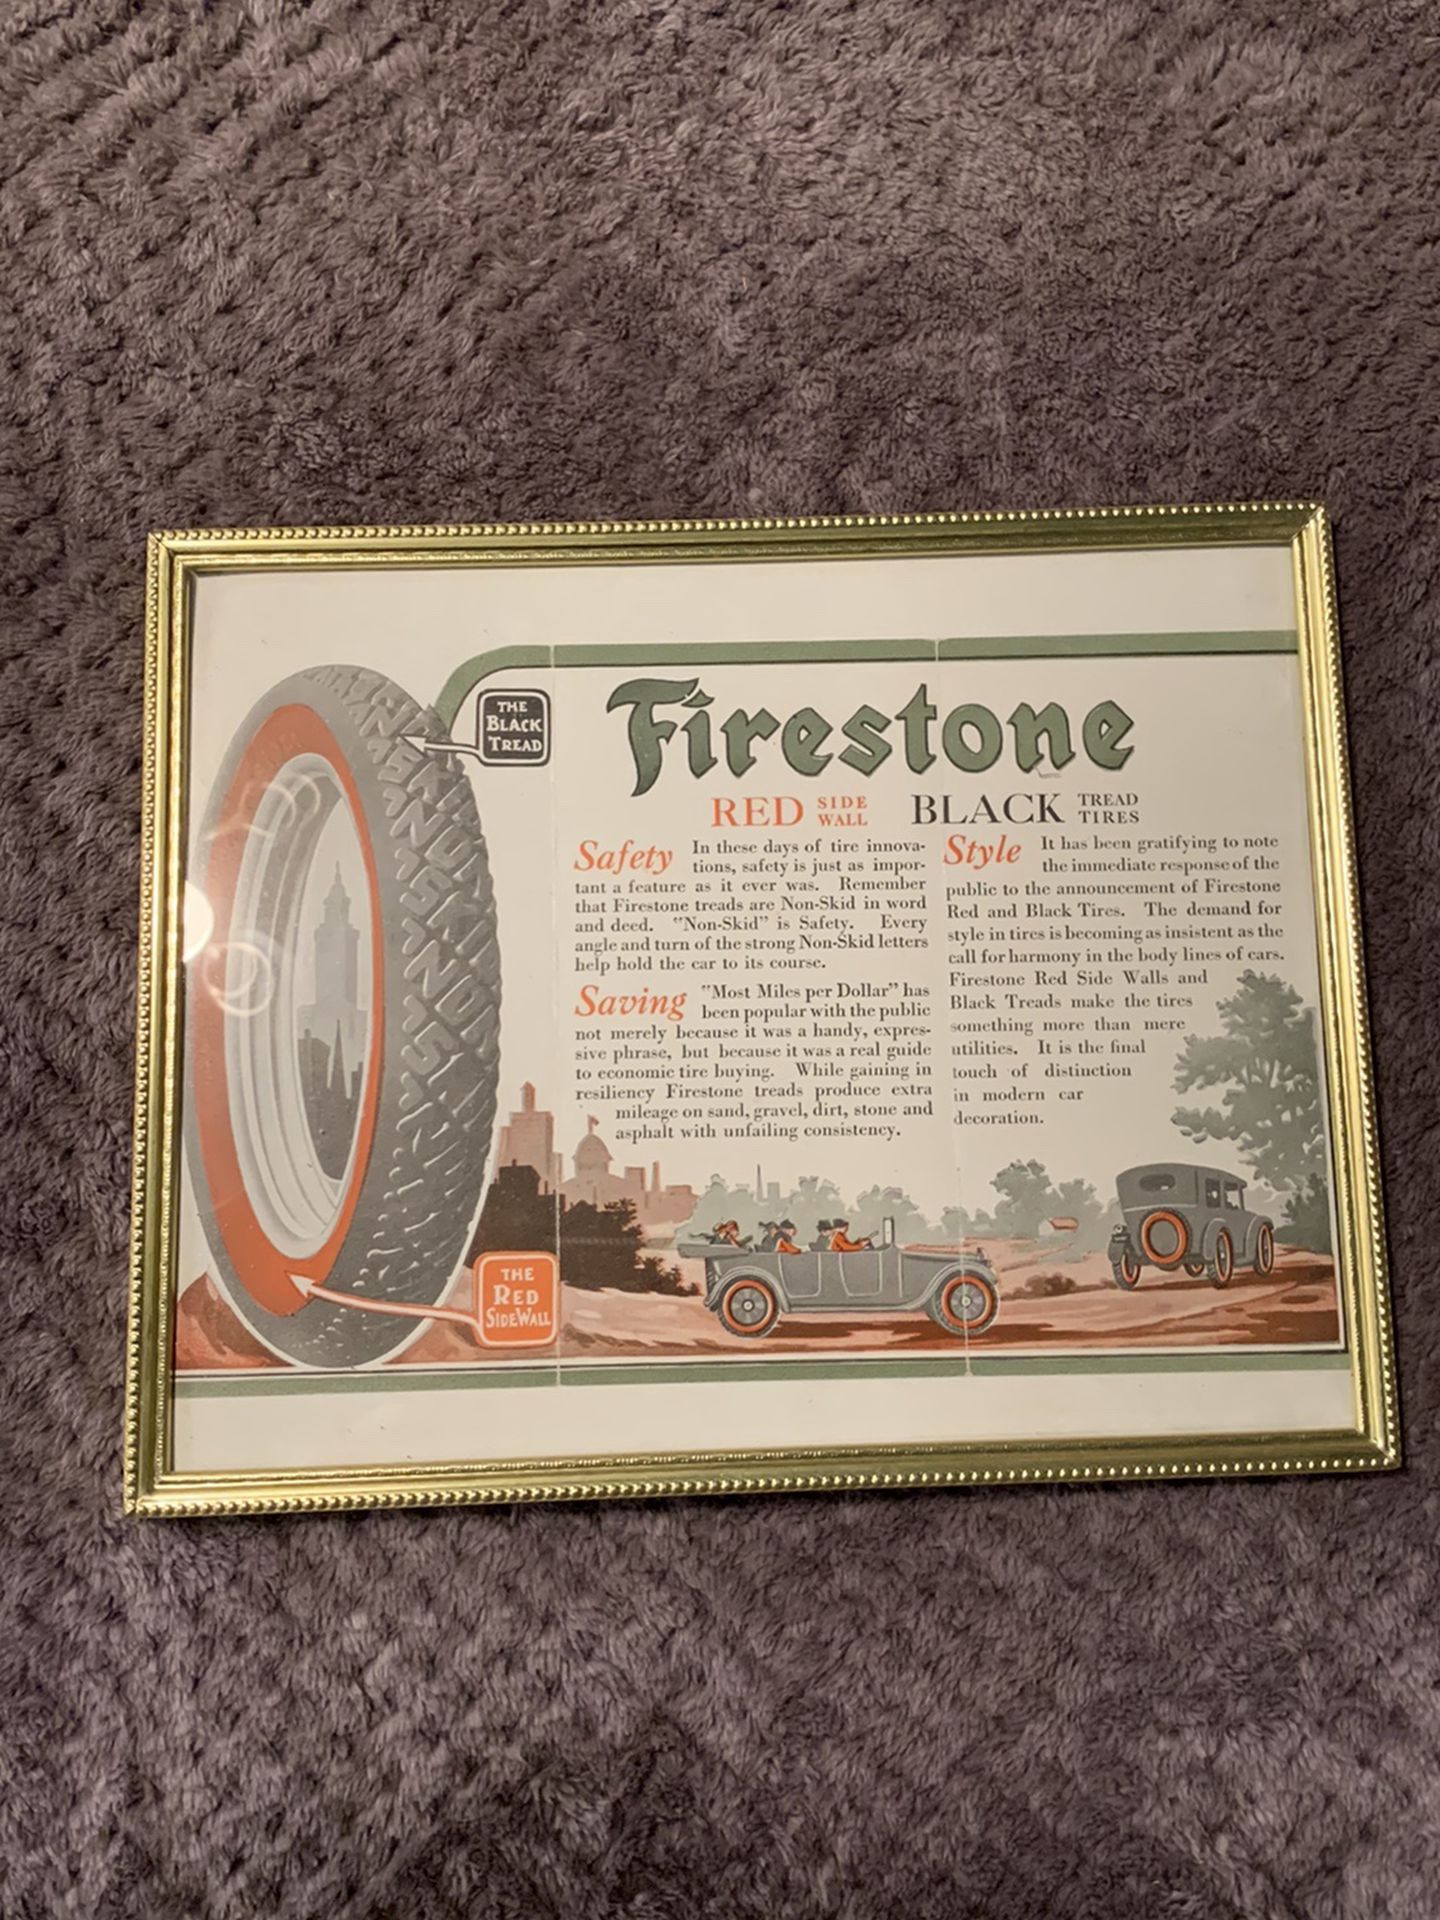 Mint conditionVintage 1916 fire stone red side wall tire Advertising  Pamphlet